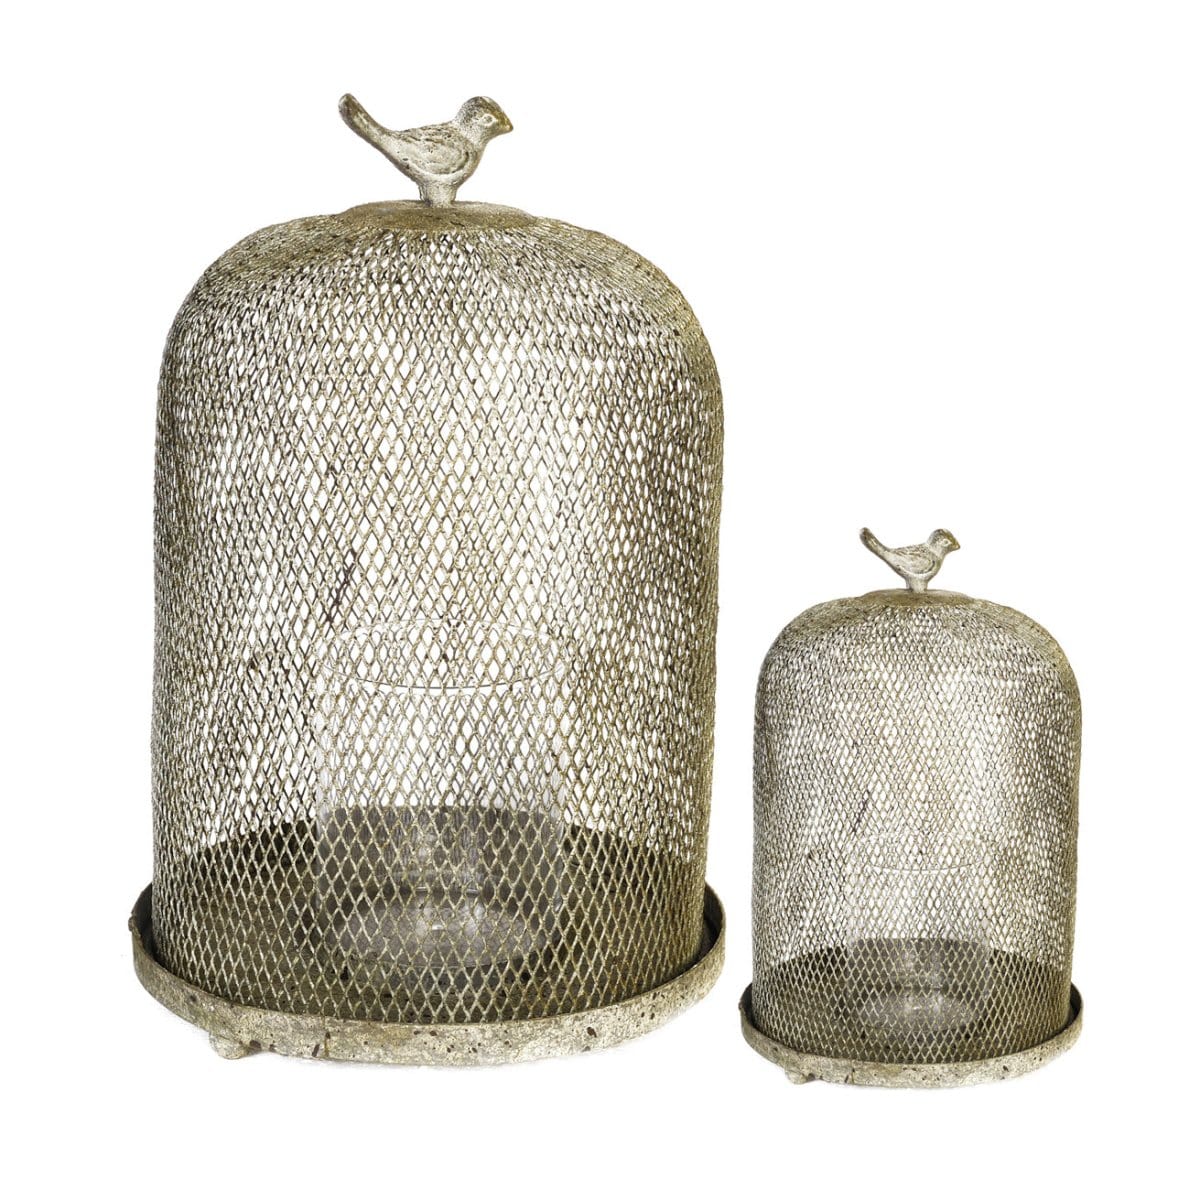 AB-30969  S/2 Ophira Golden Sparrow Mesh Candle Holders L:D8.5X13" S:D7X10" picket and rail